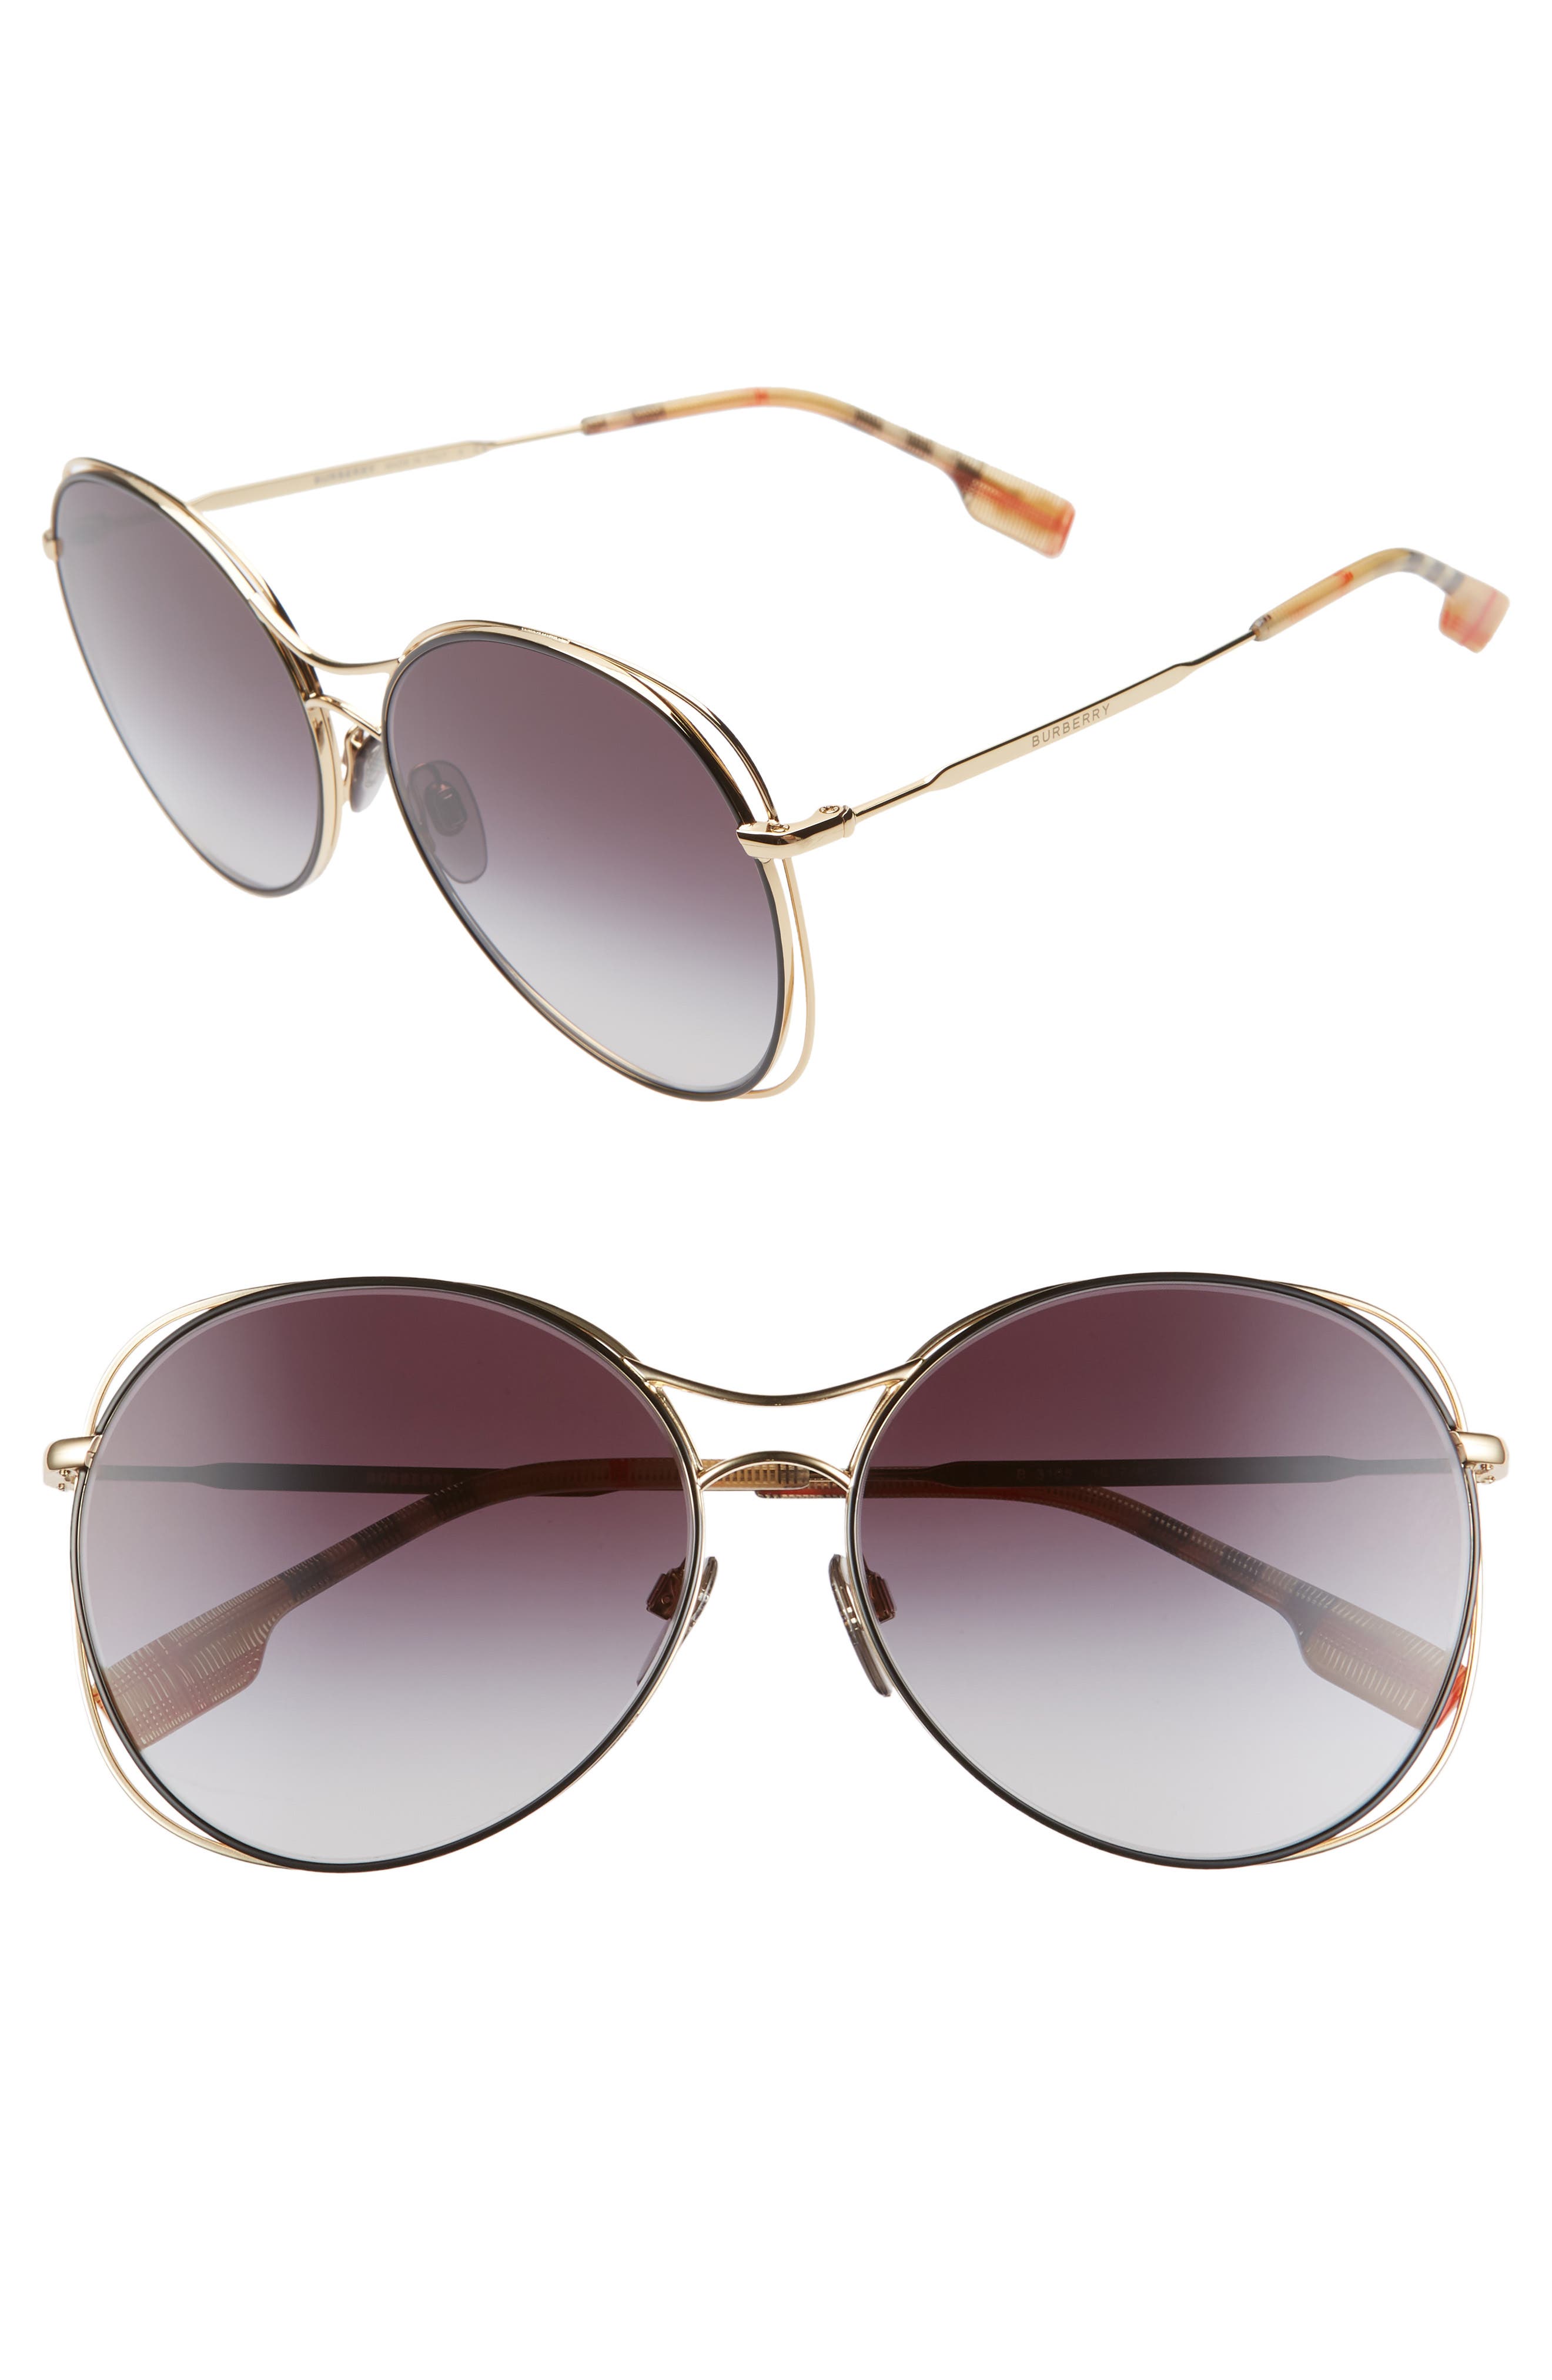 Burberry 60mm Gradient Round Sunglasses in Gold/Black at Nordstrom